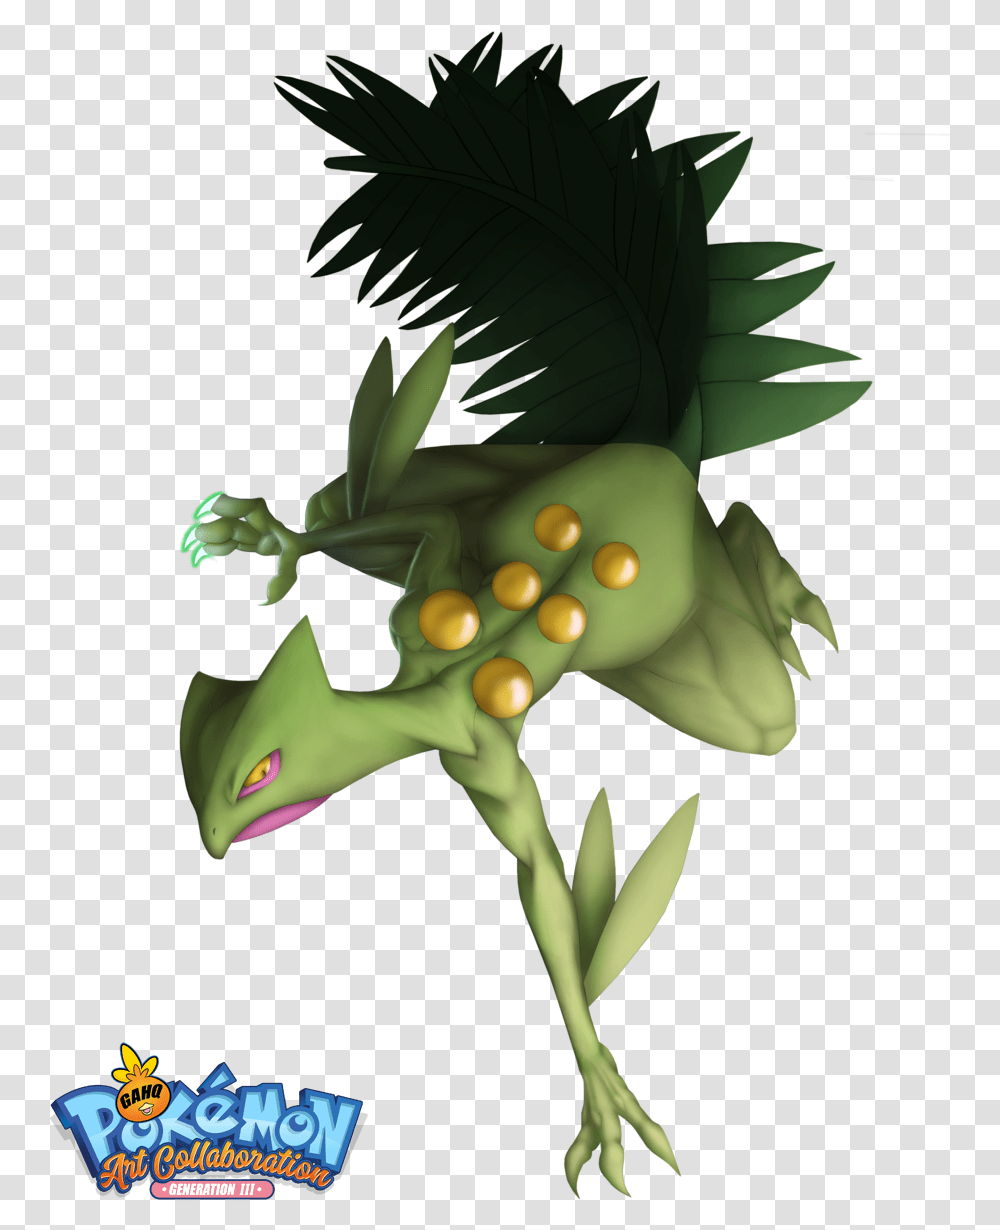 Download Hd Sceptile Using Dragon Claw By 13alrog Pokemon Fictional Character, Plant, Green, Amphibian, Wildlife Transparent Png